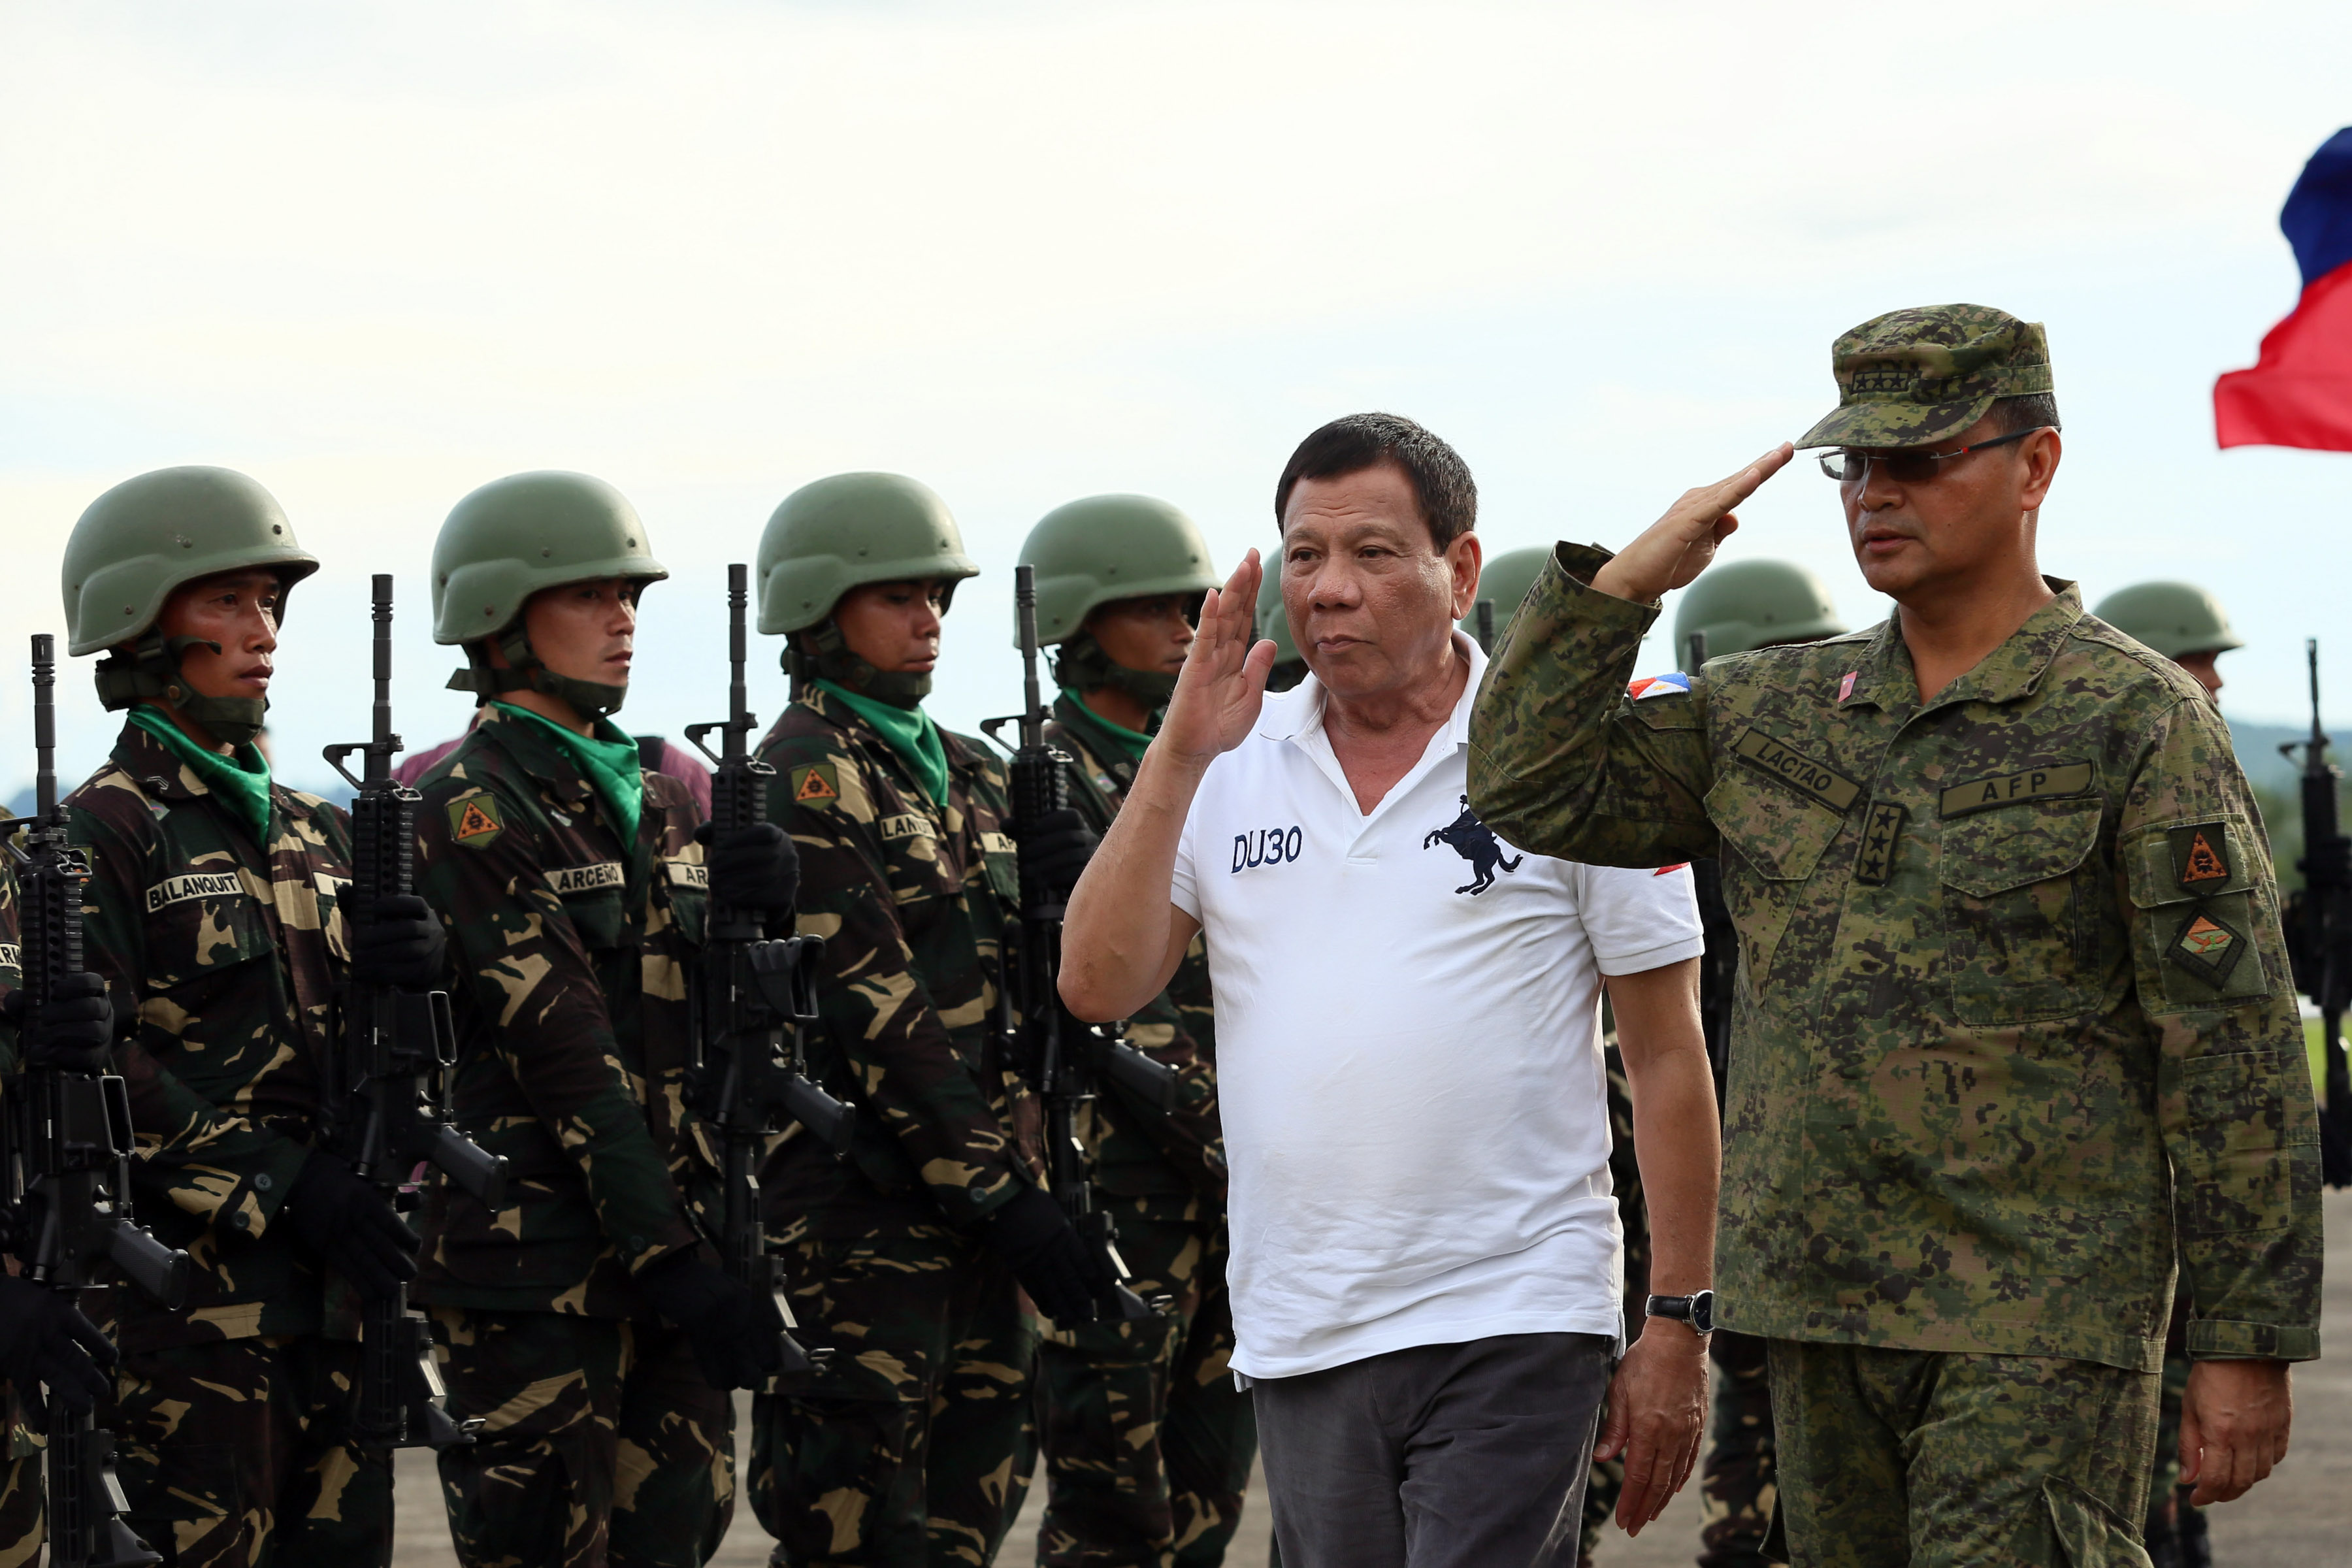 DUTERTE. President Rodrigo Roa Duterte is accompanied by Armed Forces of the Philippines Central Command Chief Lt. Gen. Oscar Lactao as the President is accorded with military honors upon his arrival at the at the Ormoc City Airport for his visit to the earthquake-ravaged Leyte on July 13, 2017. Photo by ROBINSON NINAL JR./PRESIDENTIAL PHOTO 